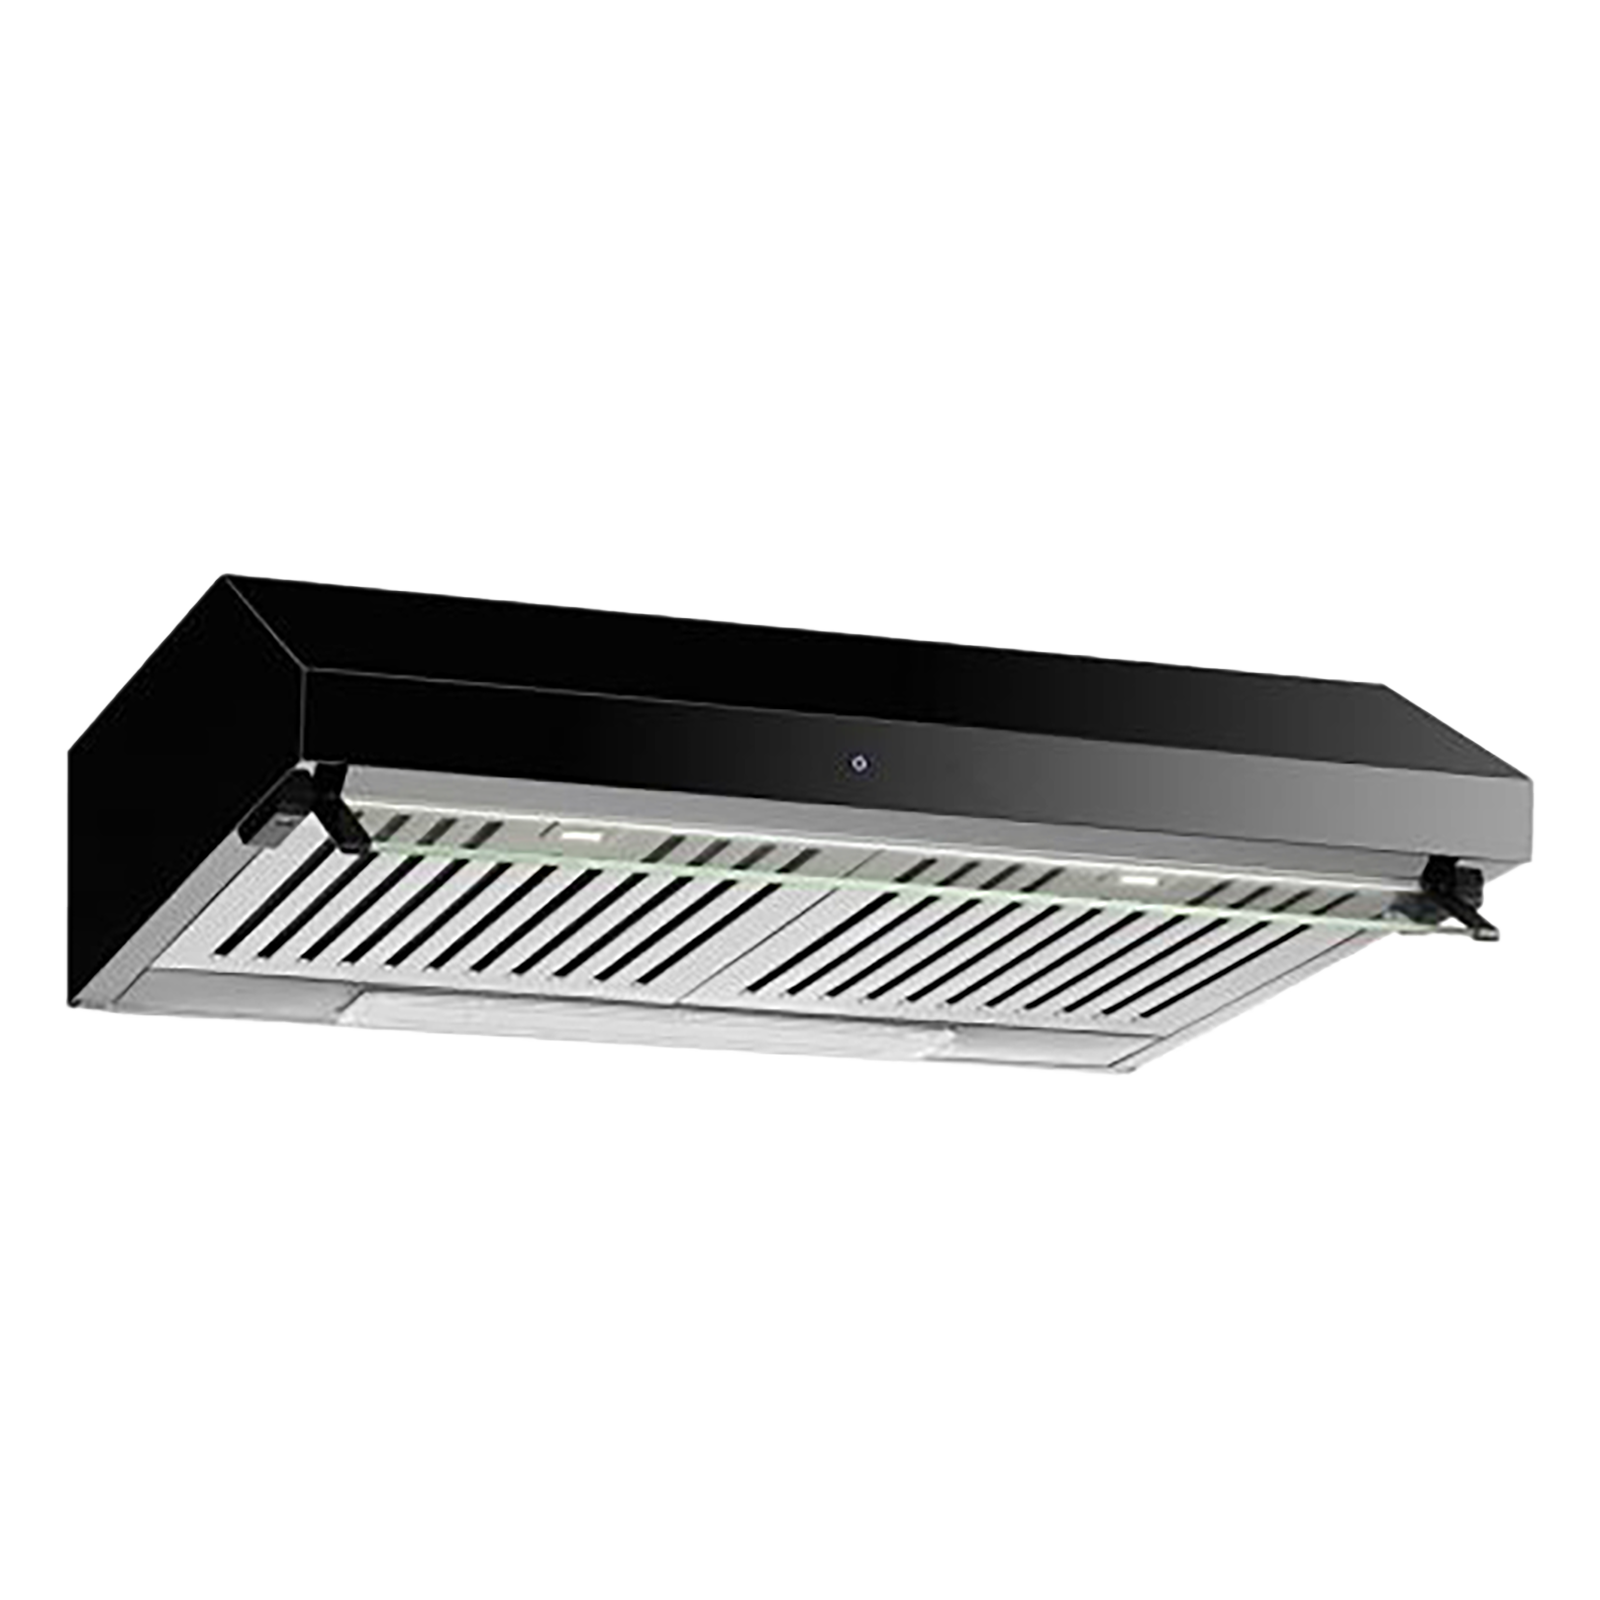 Faber Hood Ruby XL 700 m³/hr 60cm Wall Mount Chimney (Baffle Filter, TC BK 60, Stainless Steel)